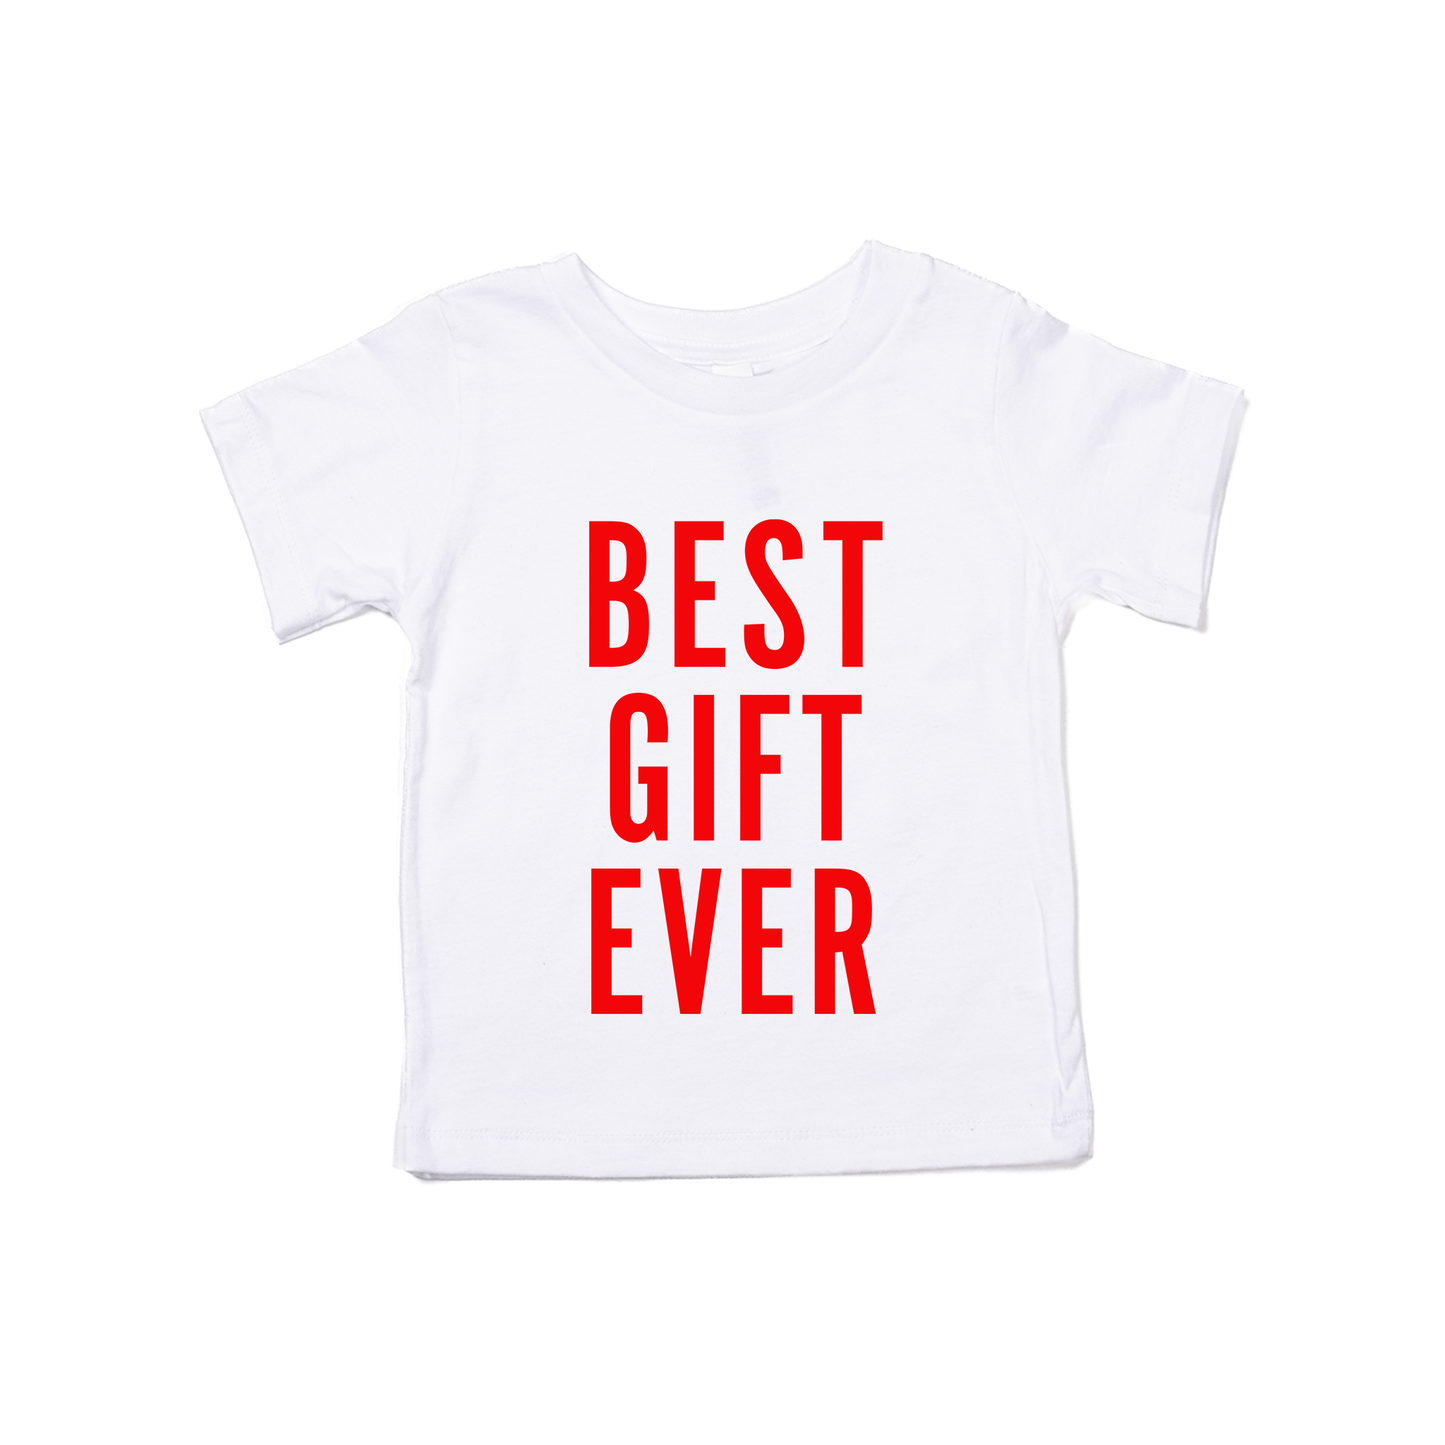 Best Gift Ever (Red) - Kids Tee (White)